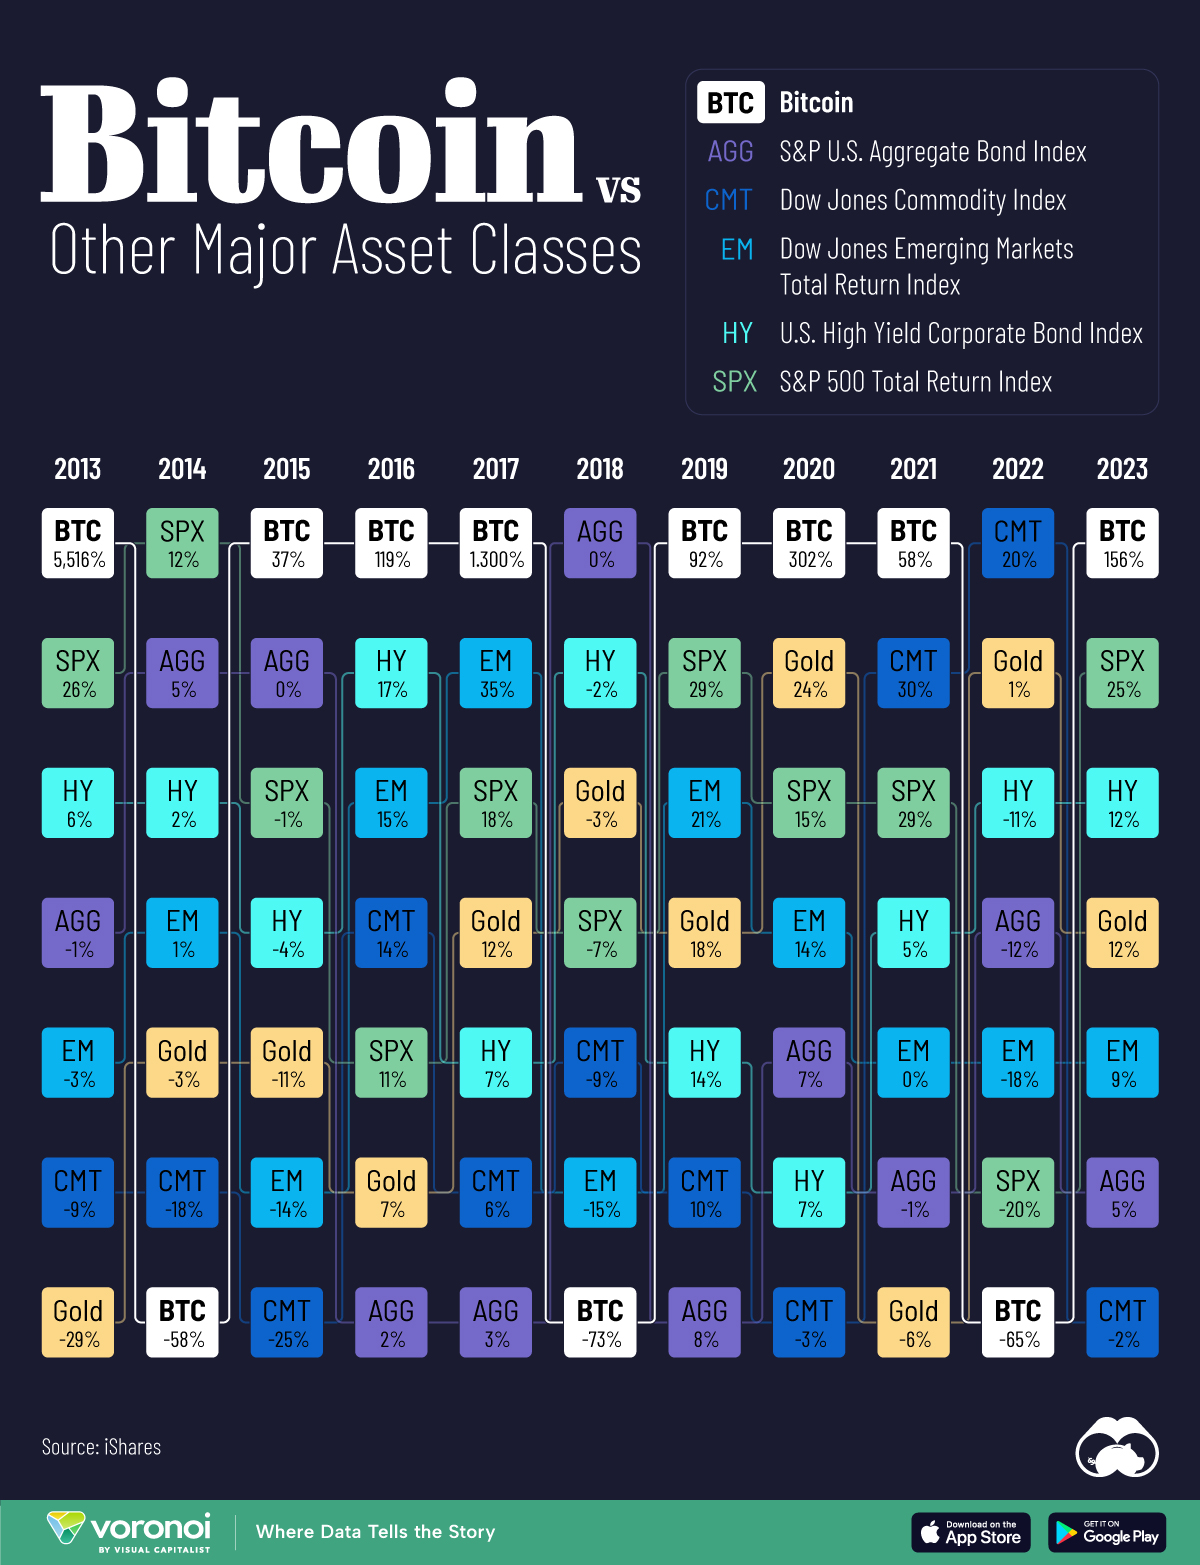 This graphic shows bitcoin's performance compared to other major assets over the last decade